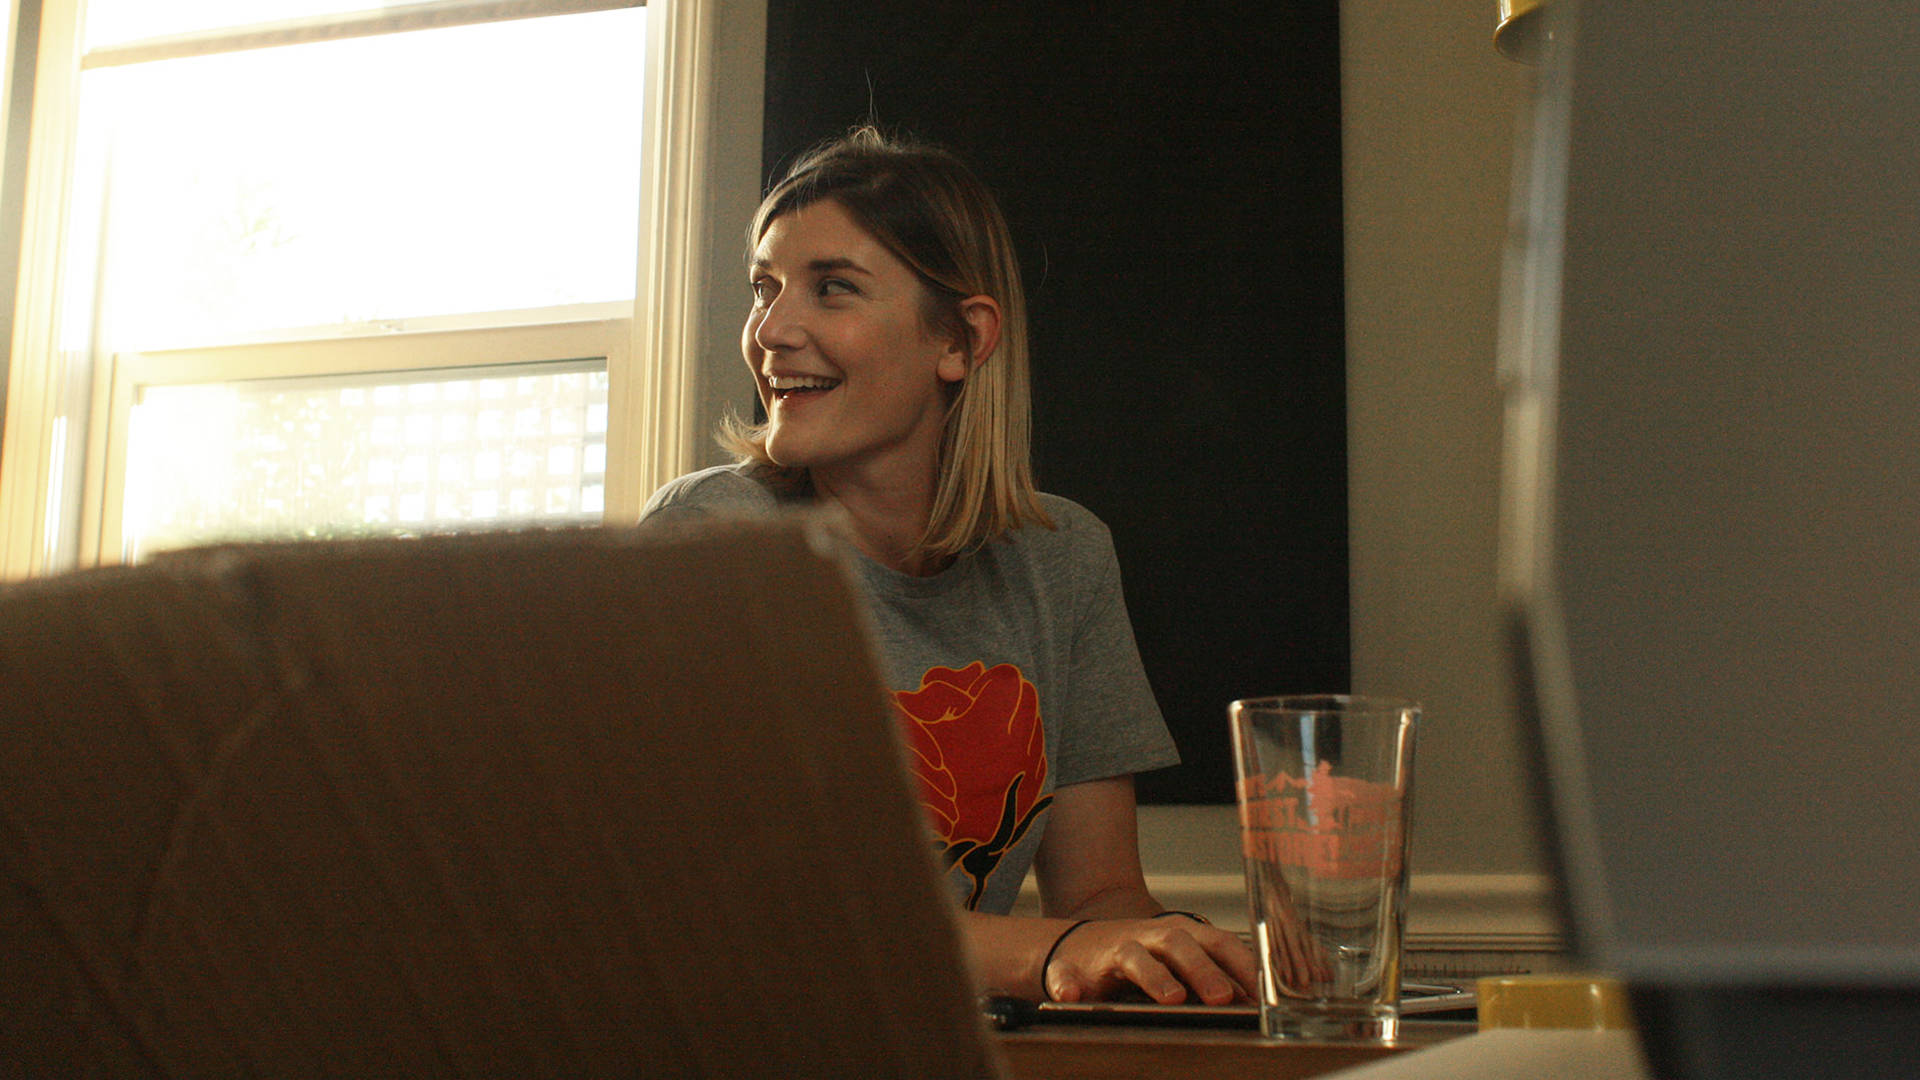 Illustrator Mikayla Butchart wearing one of her 'Rose-ilience' t-shirts in her Santa Rosa home studio. Gabe Meline/KQED